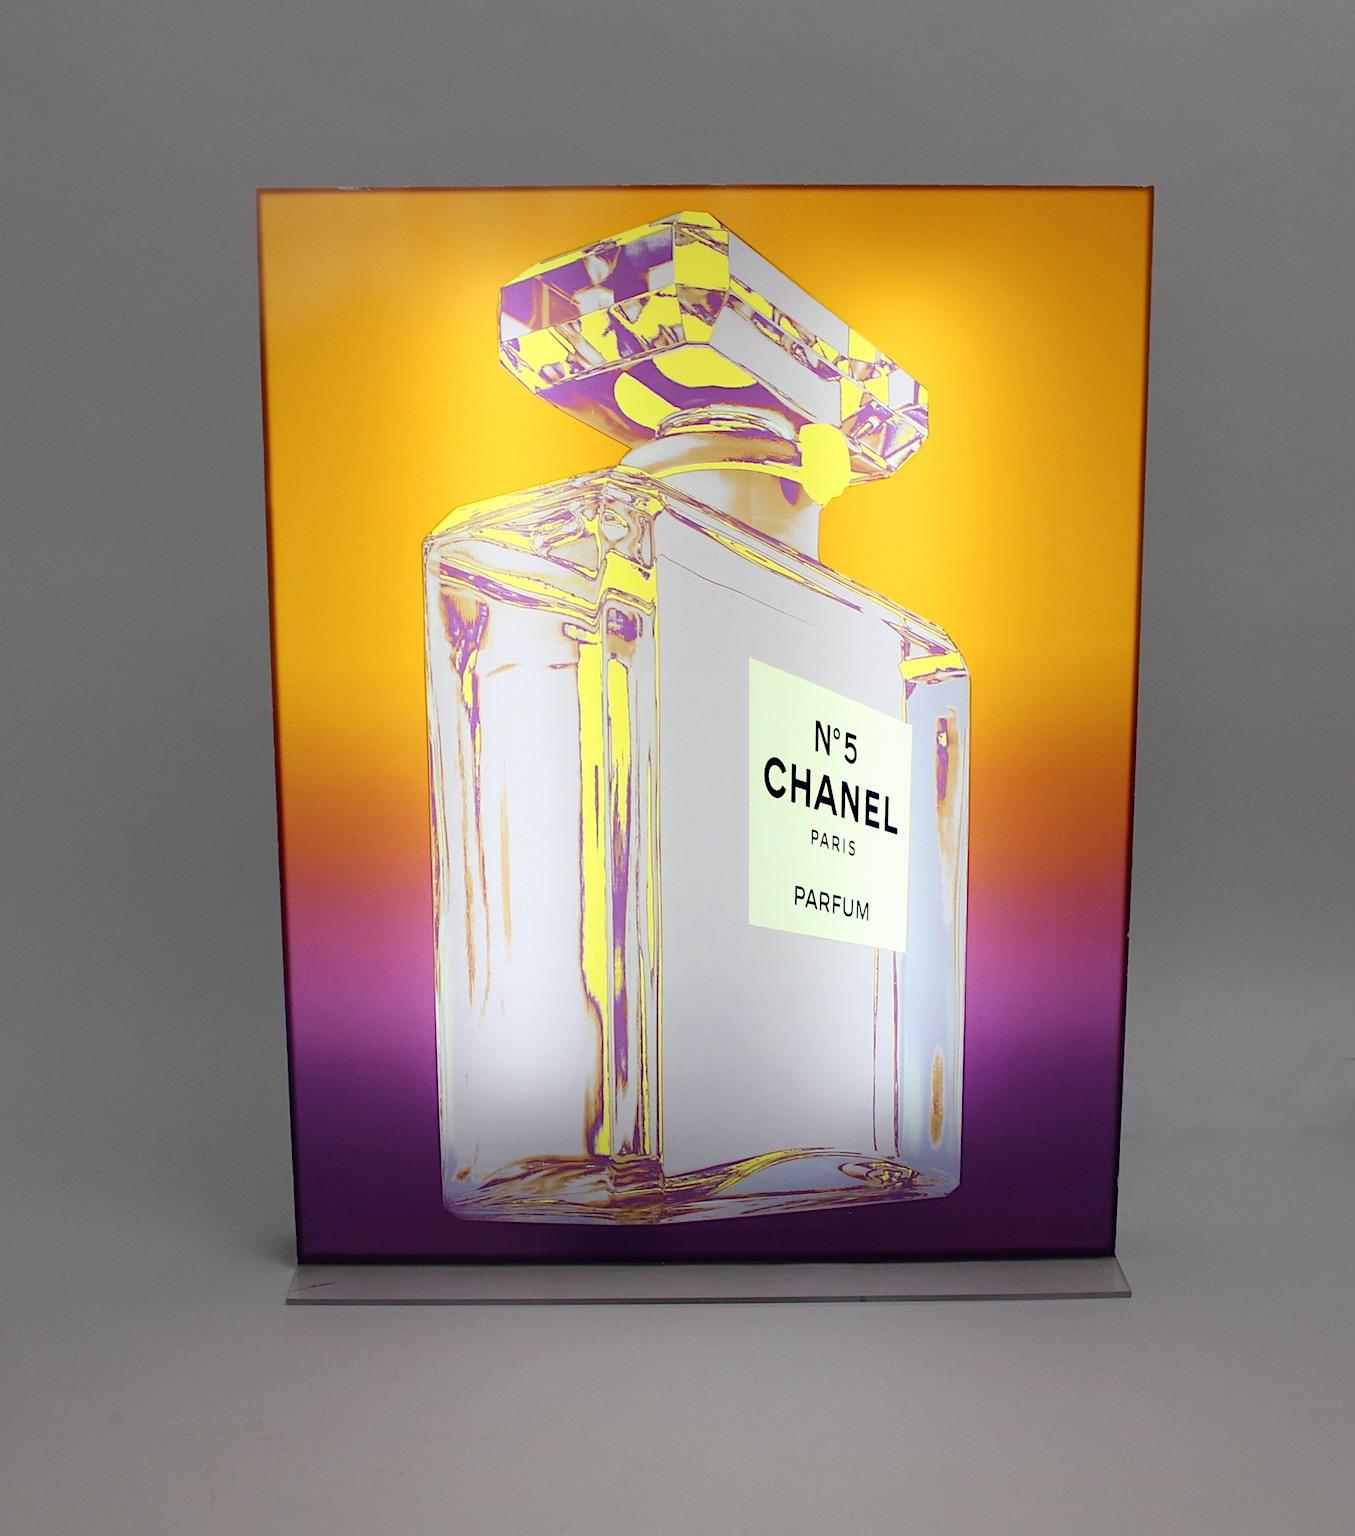 Pop Art Chanel No. 5 vintage advertising display with the iconic sign of Chanel No. 5 bottle after Andy Warhol, which was used in parfumeries and beauty stores circa 1999.
The company Chanel provided their official dealers with this advertising -